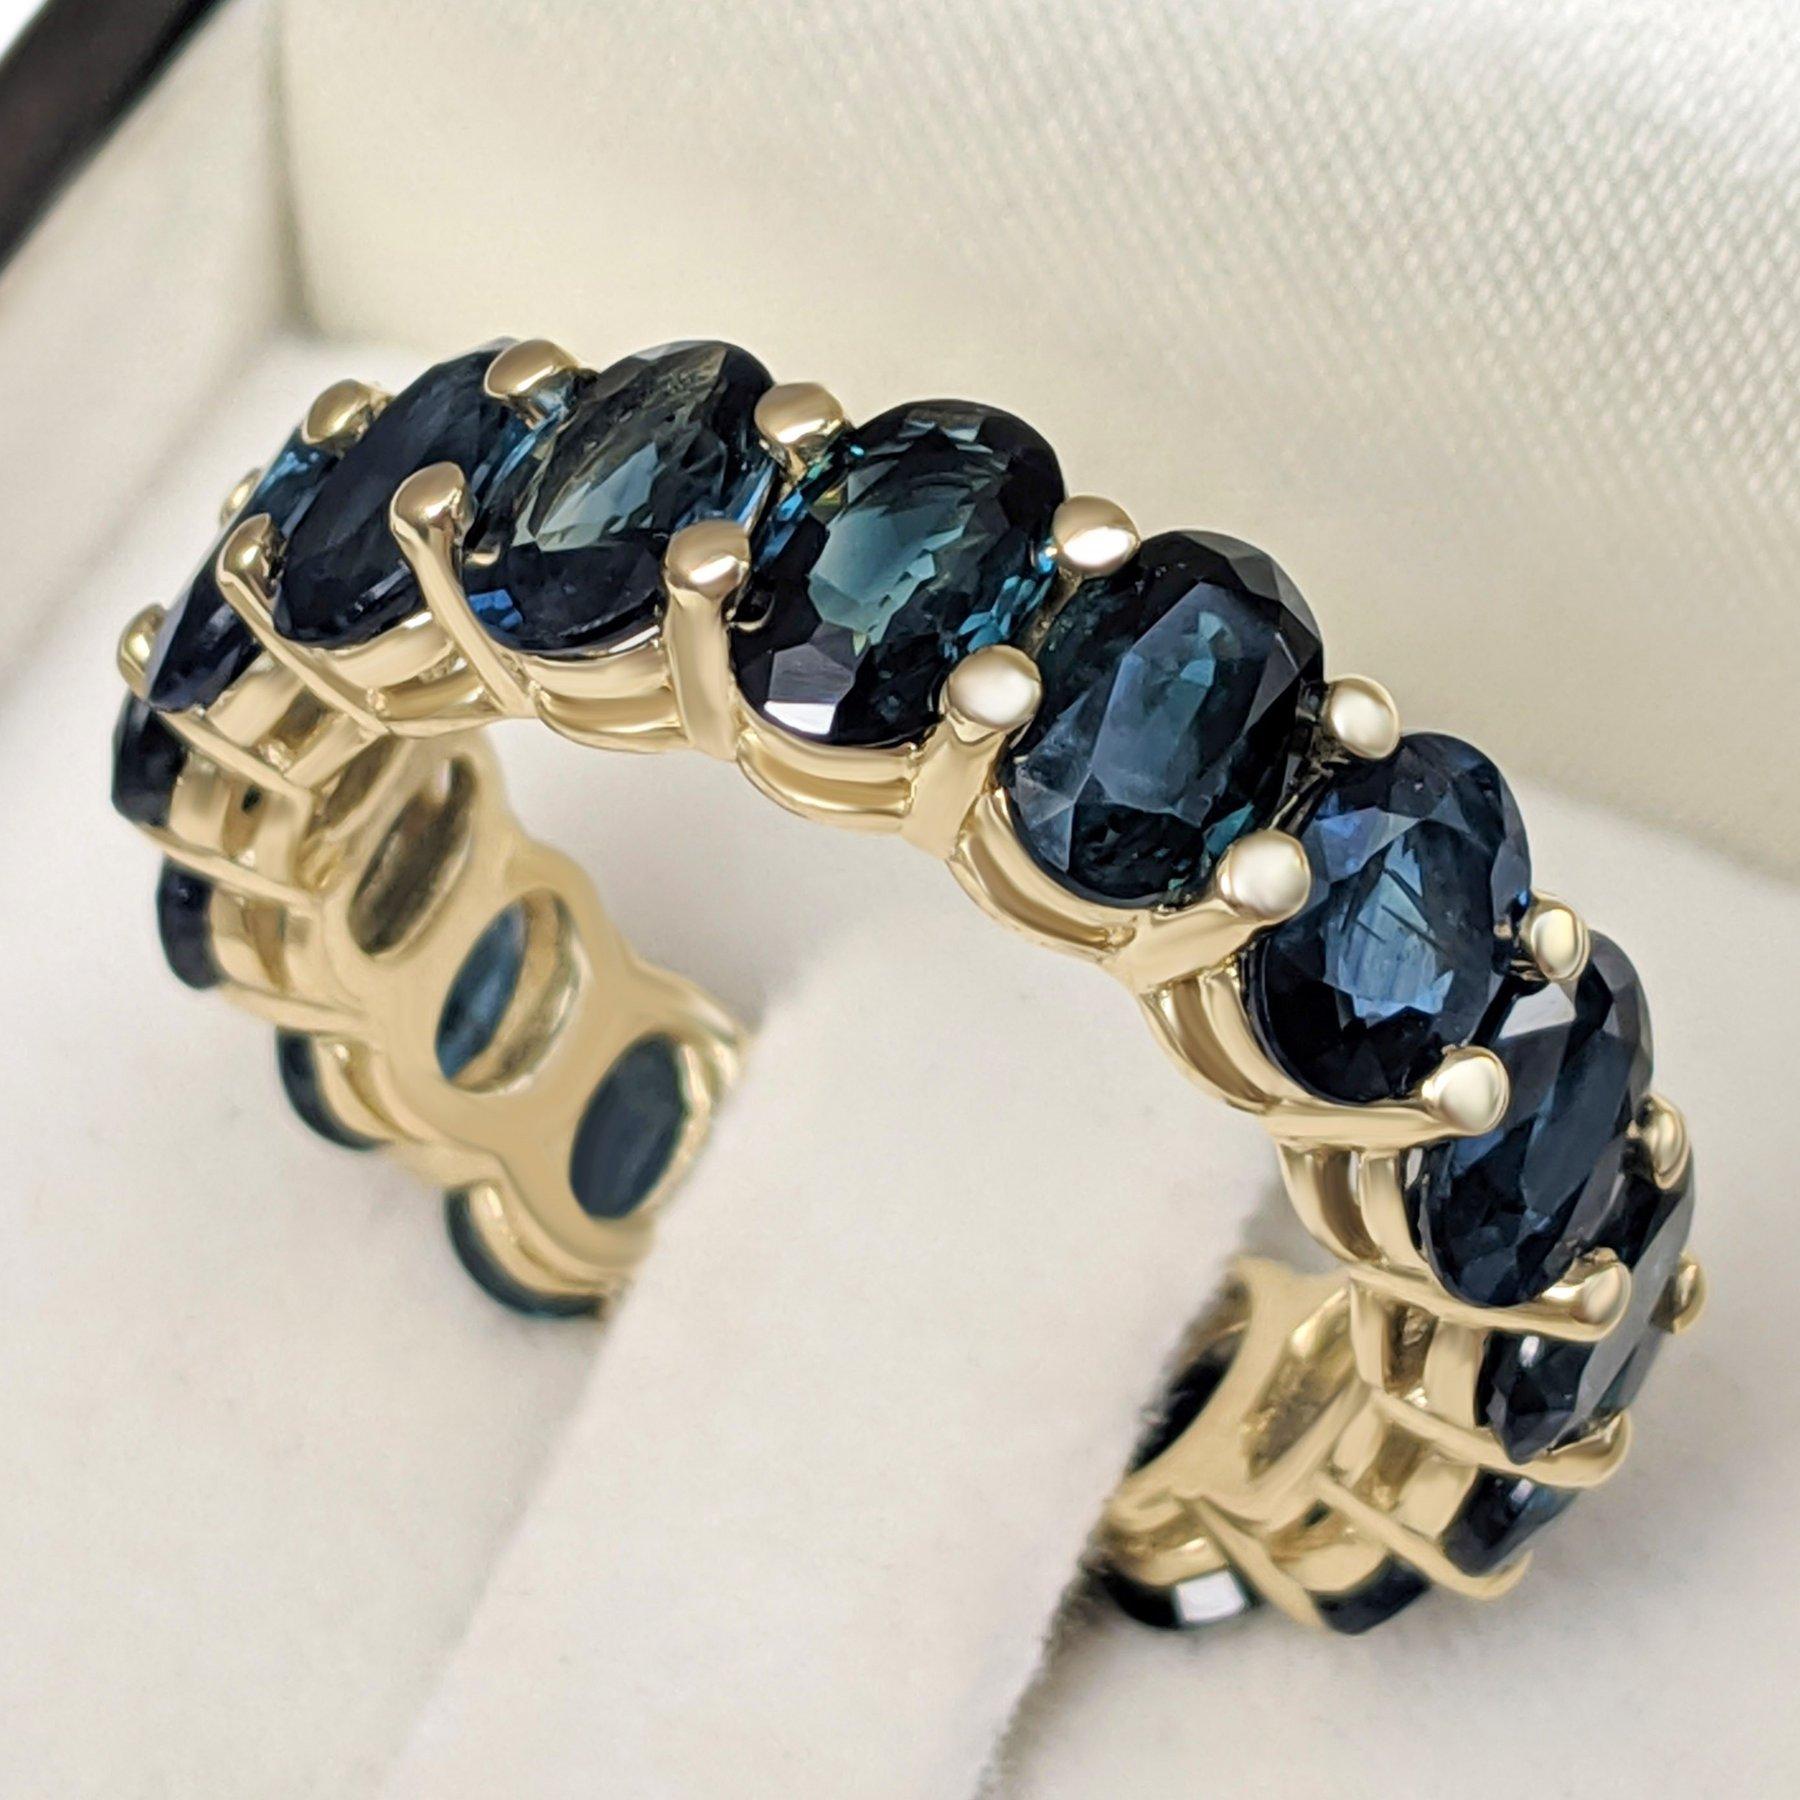 Oval Cut NO RESERVE! 9.91 Carat Sapphire Eternity Band - 14 kt. Yellow Gold - Ring